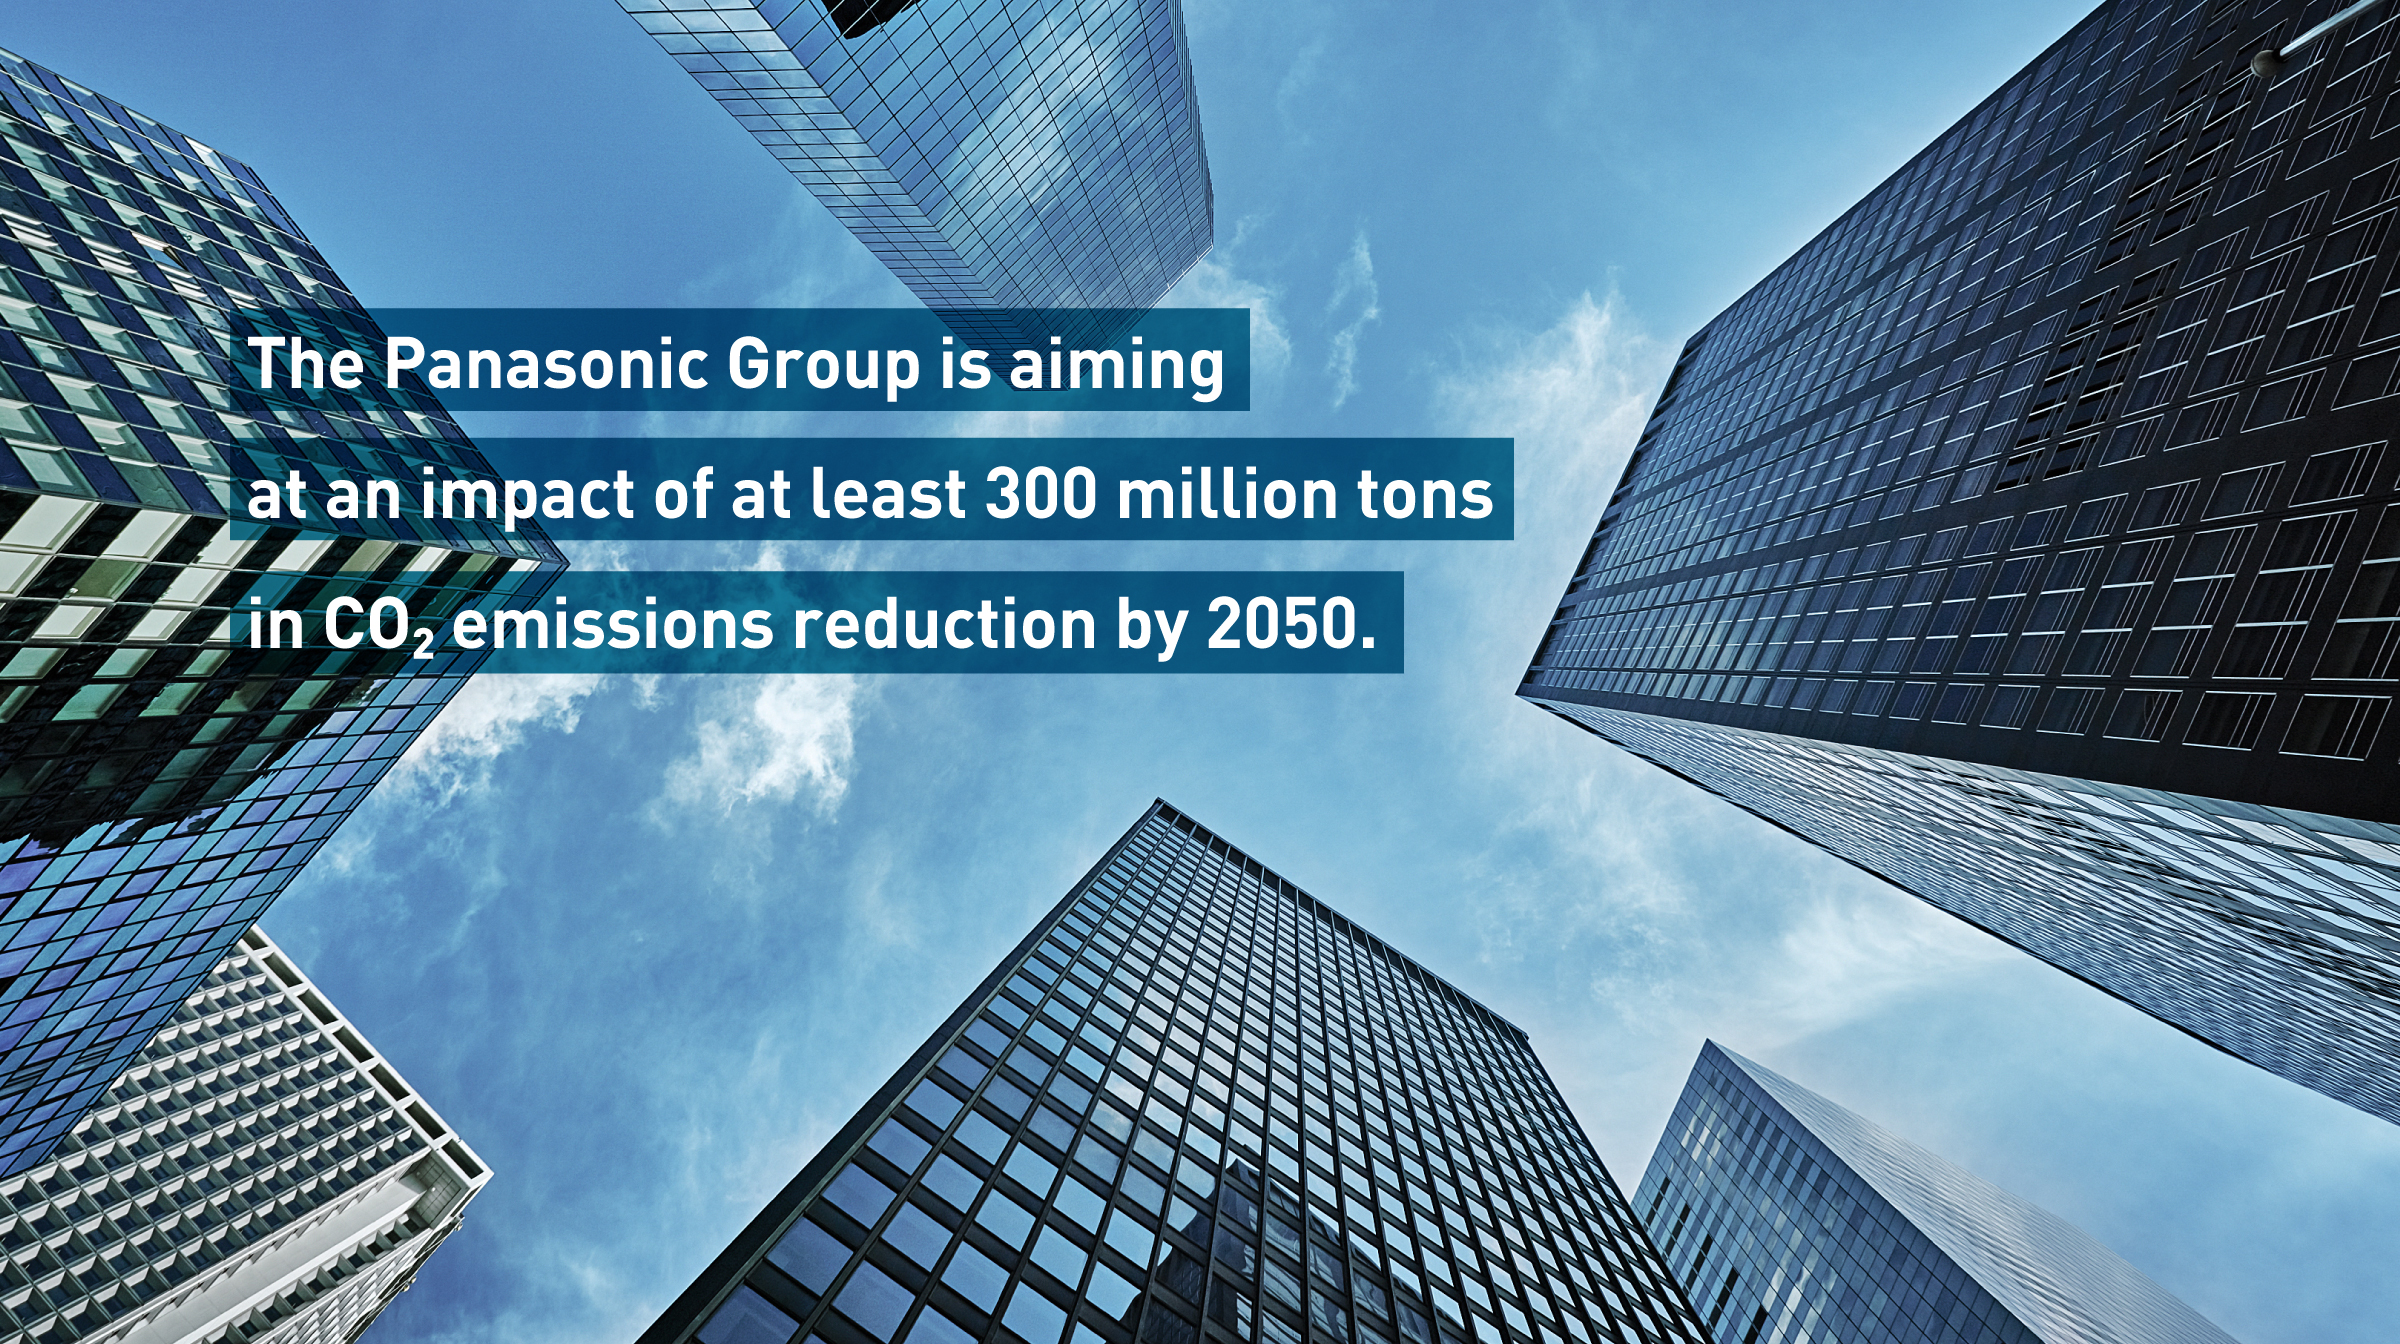 The Panasonic Group aims to reduce CO2 emissions by at least 300 million tons by 2050. 